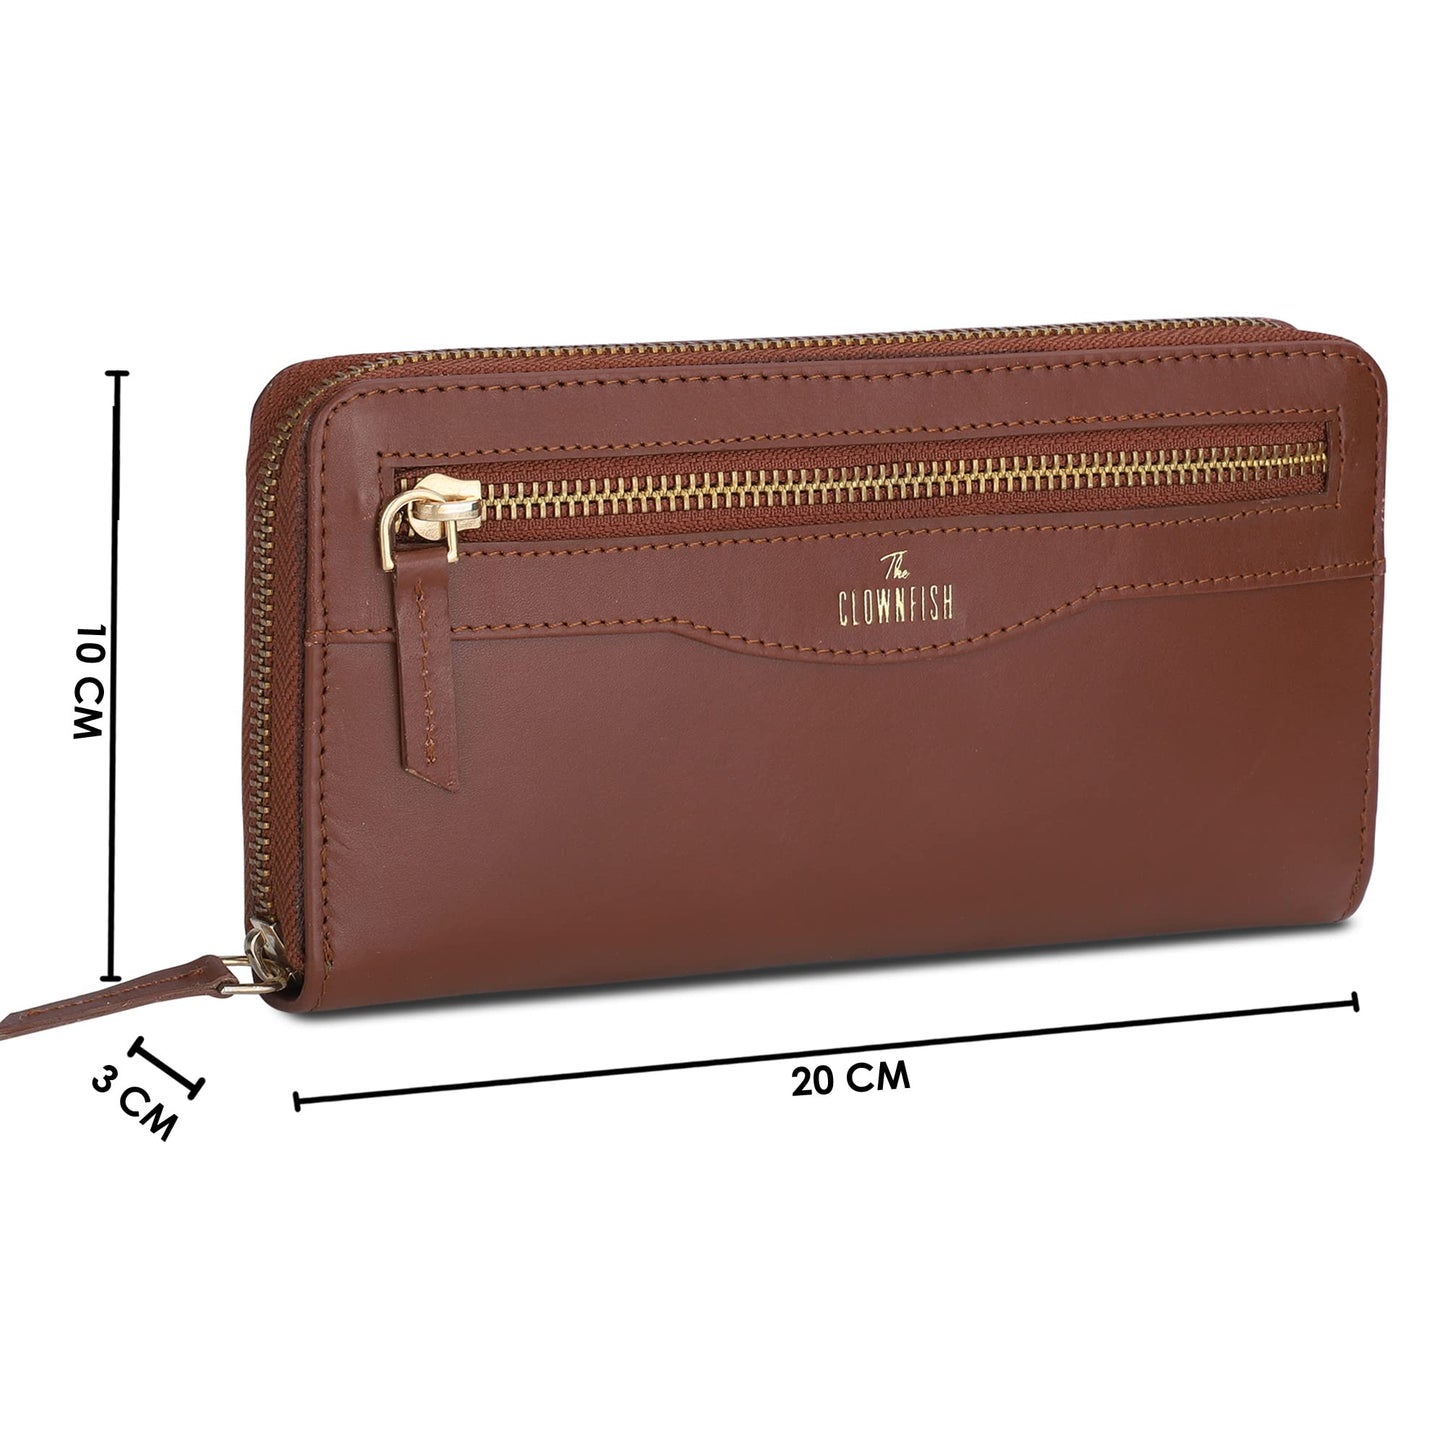 THE CLOWNFISH Eliana Collection Genuine Leather Zip Around Style Womens Wallet Clutch Ladies Purse with Card Holders (Tan)